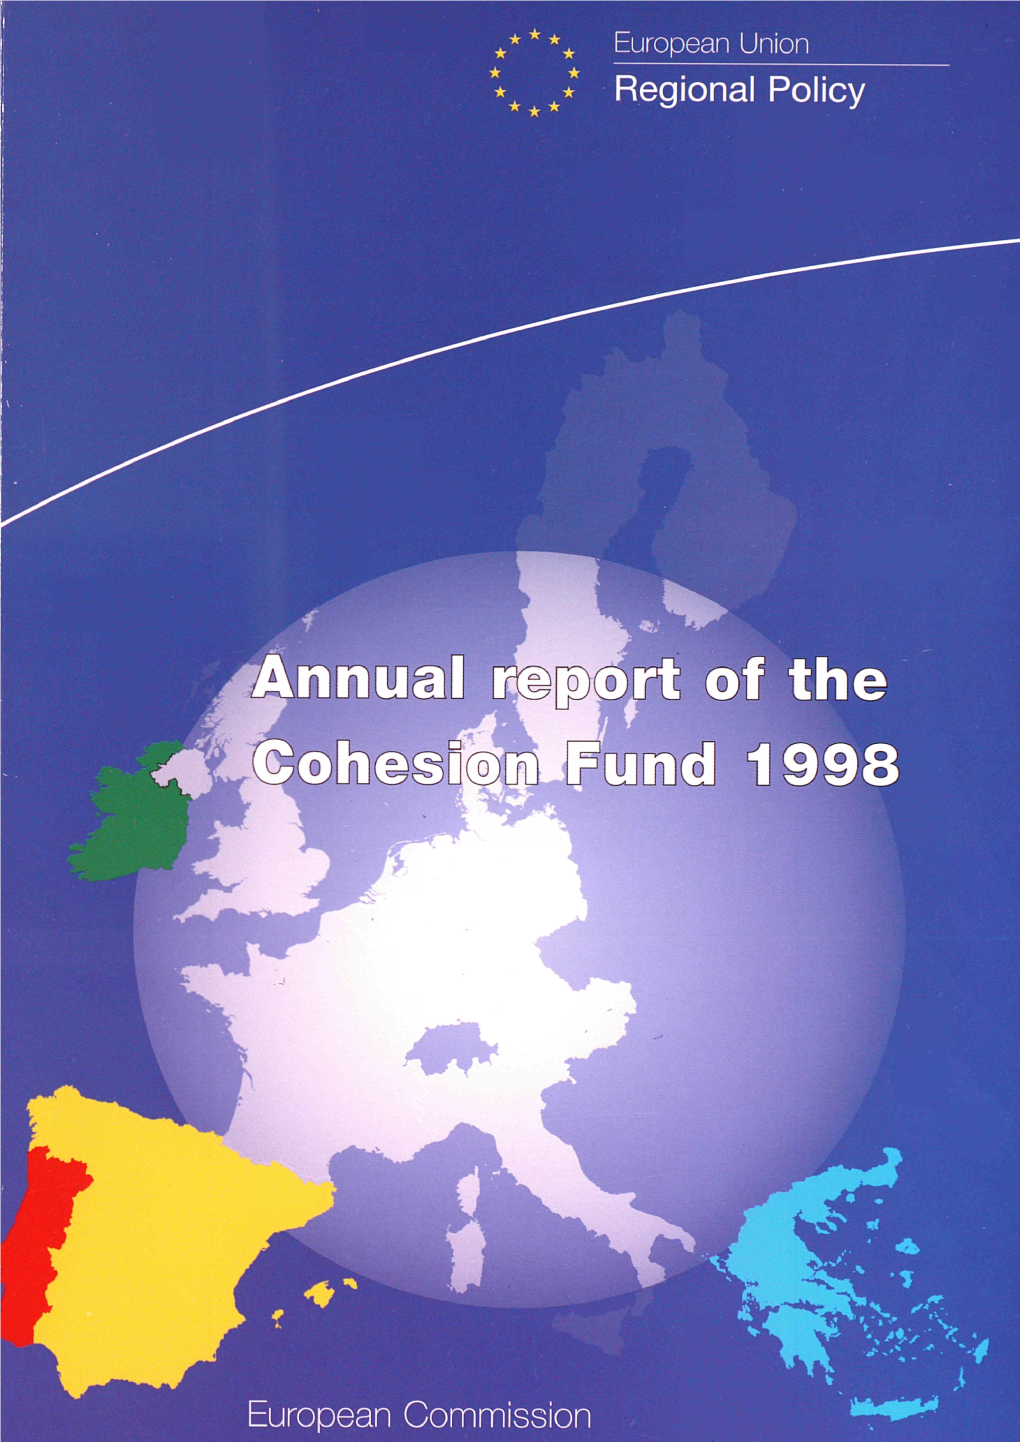 Annual Report of the Cohesion Fund 1998